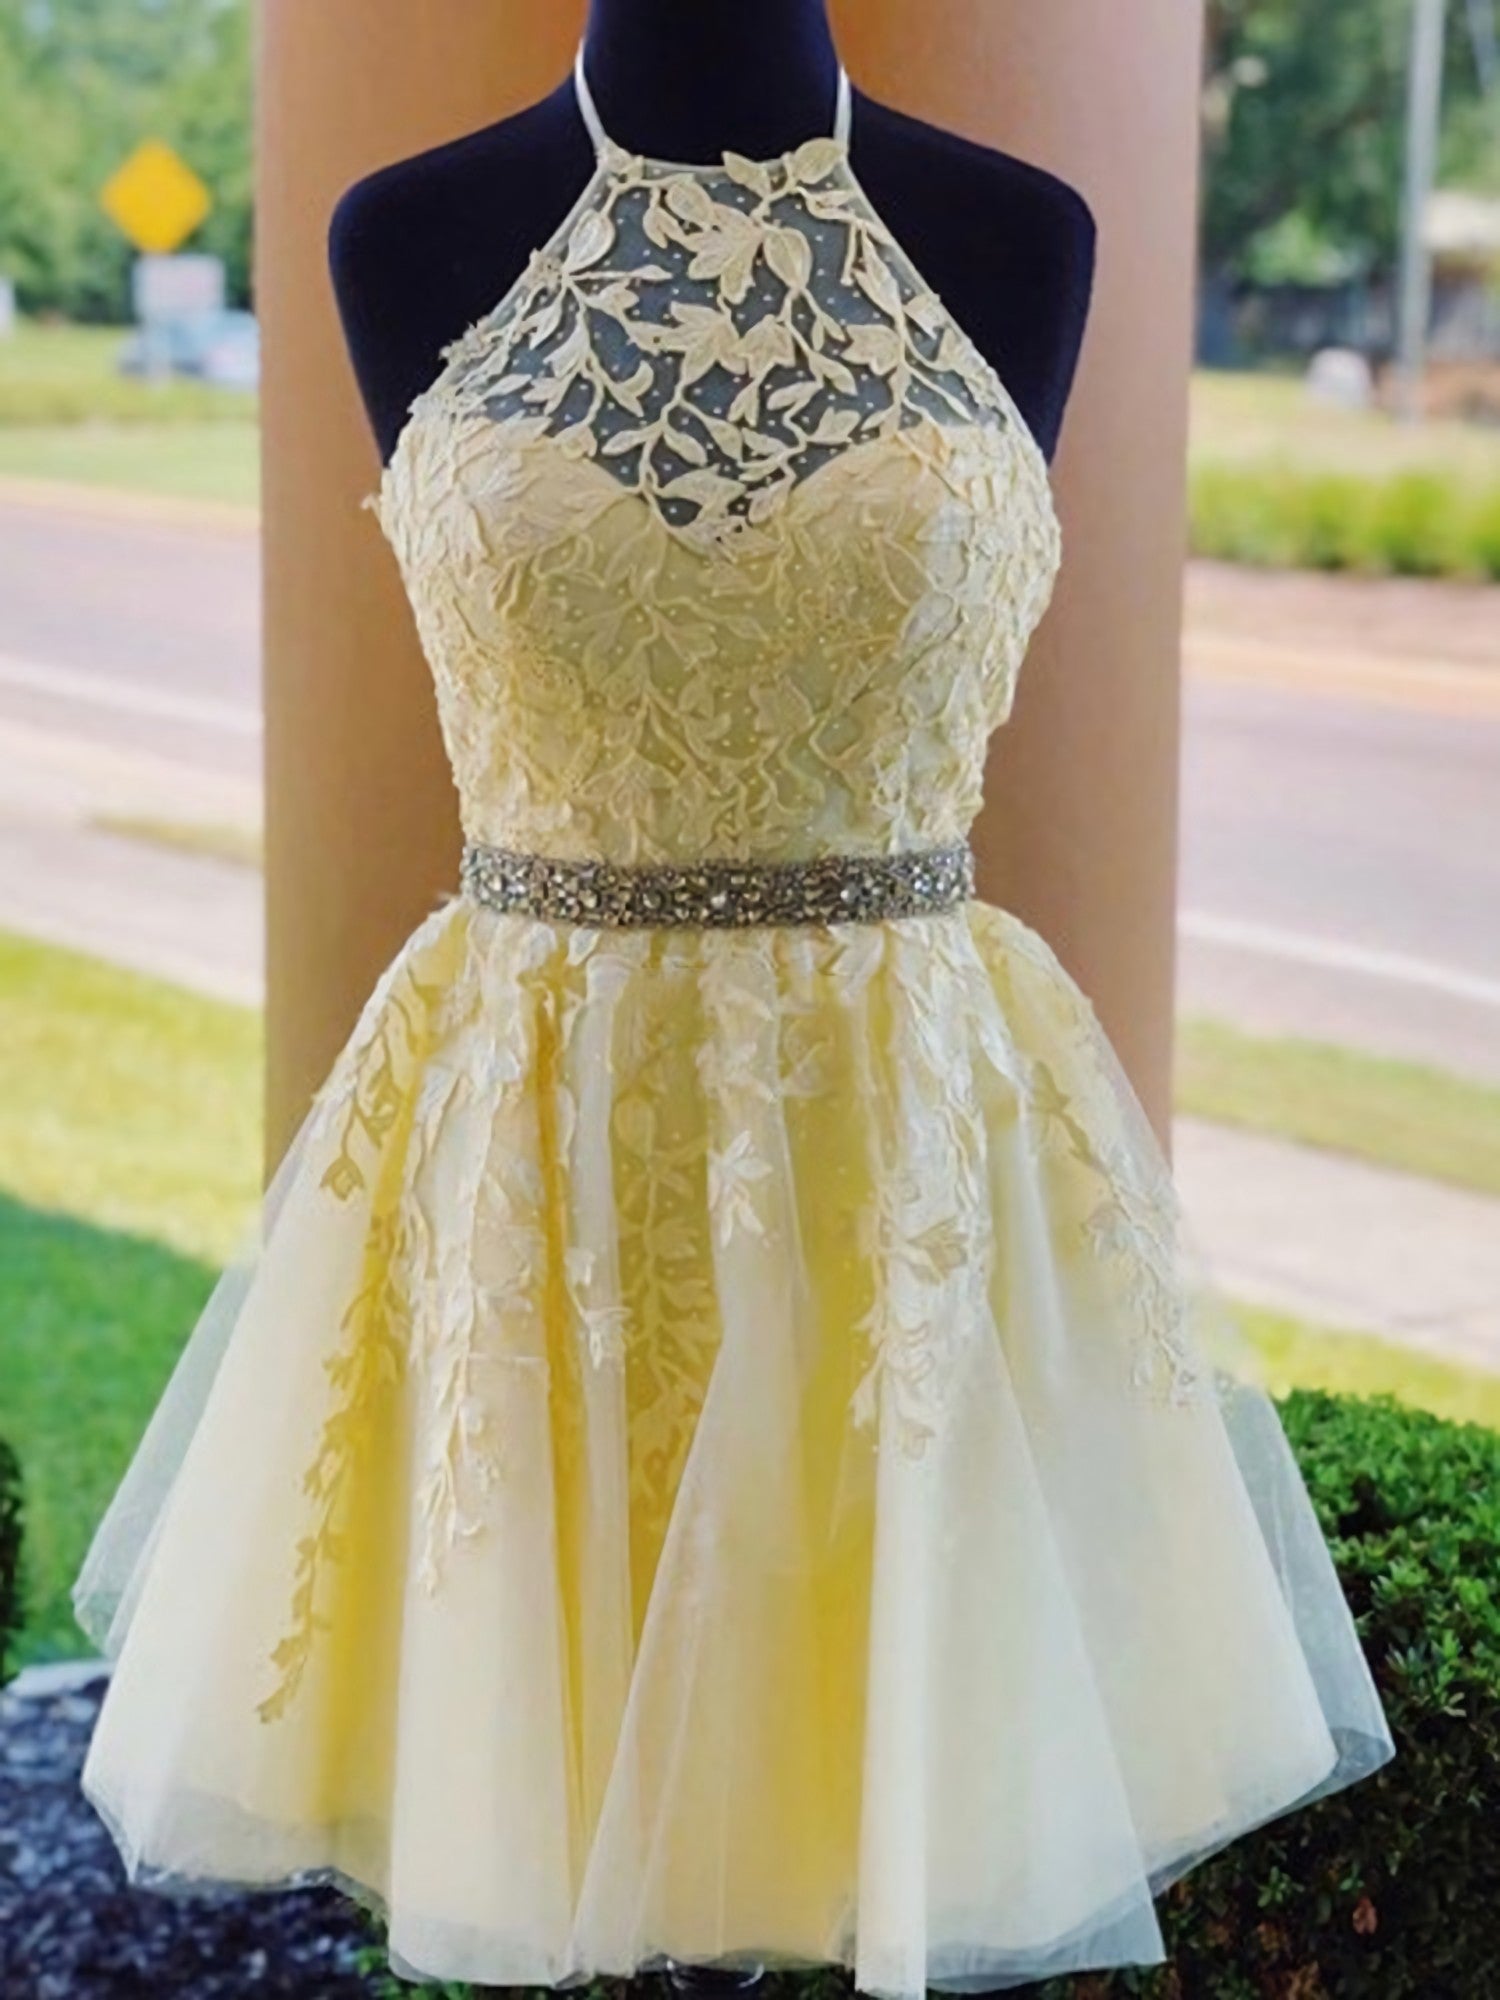 Prom Dresses Website, Charming A-Line Halter Cross Back Yellow Tulle Short with Appliques Homecoming Dresses